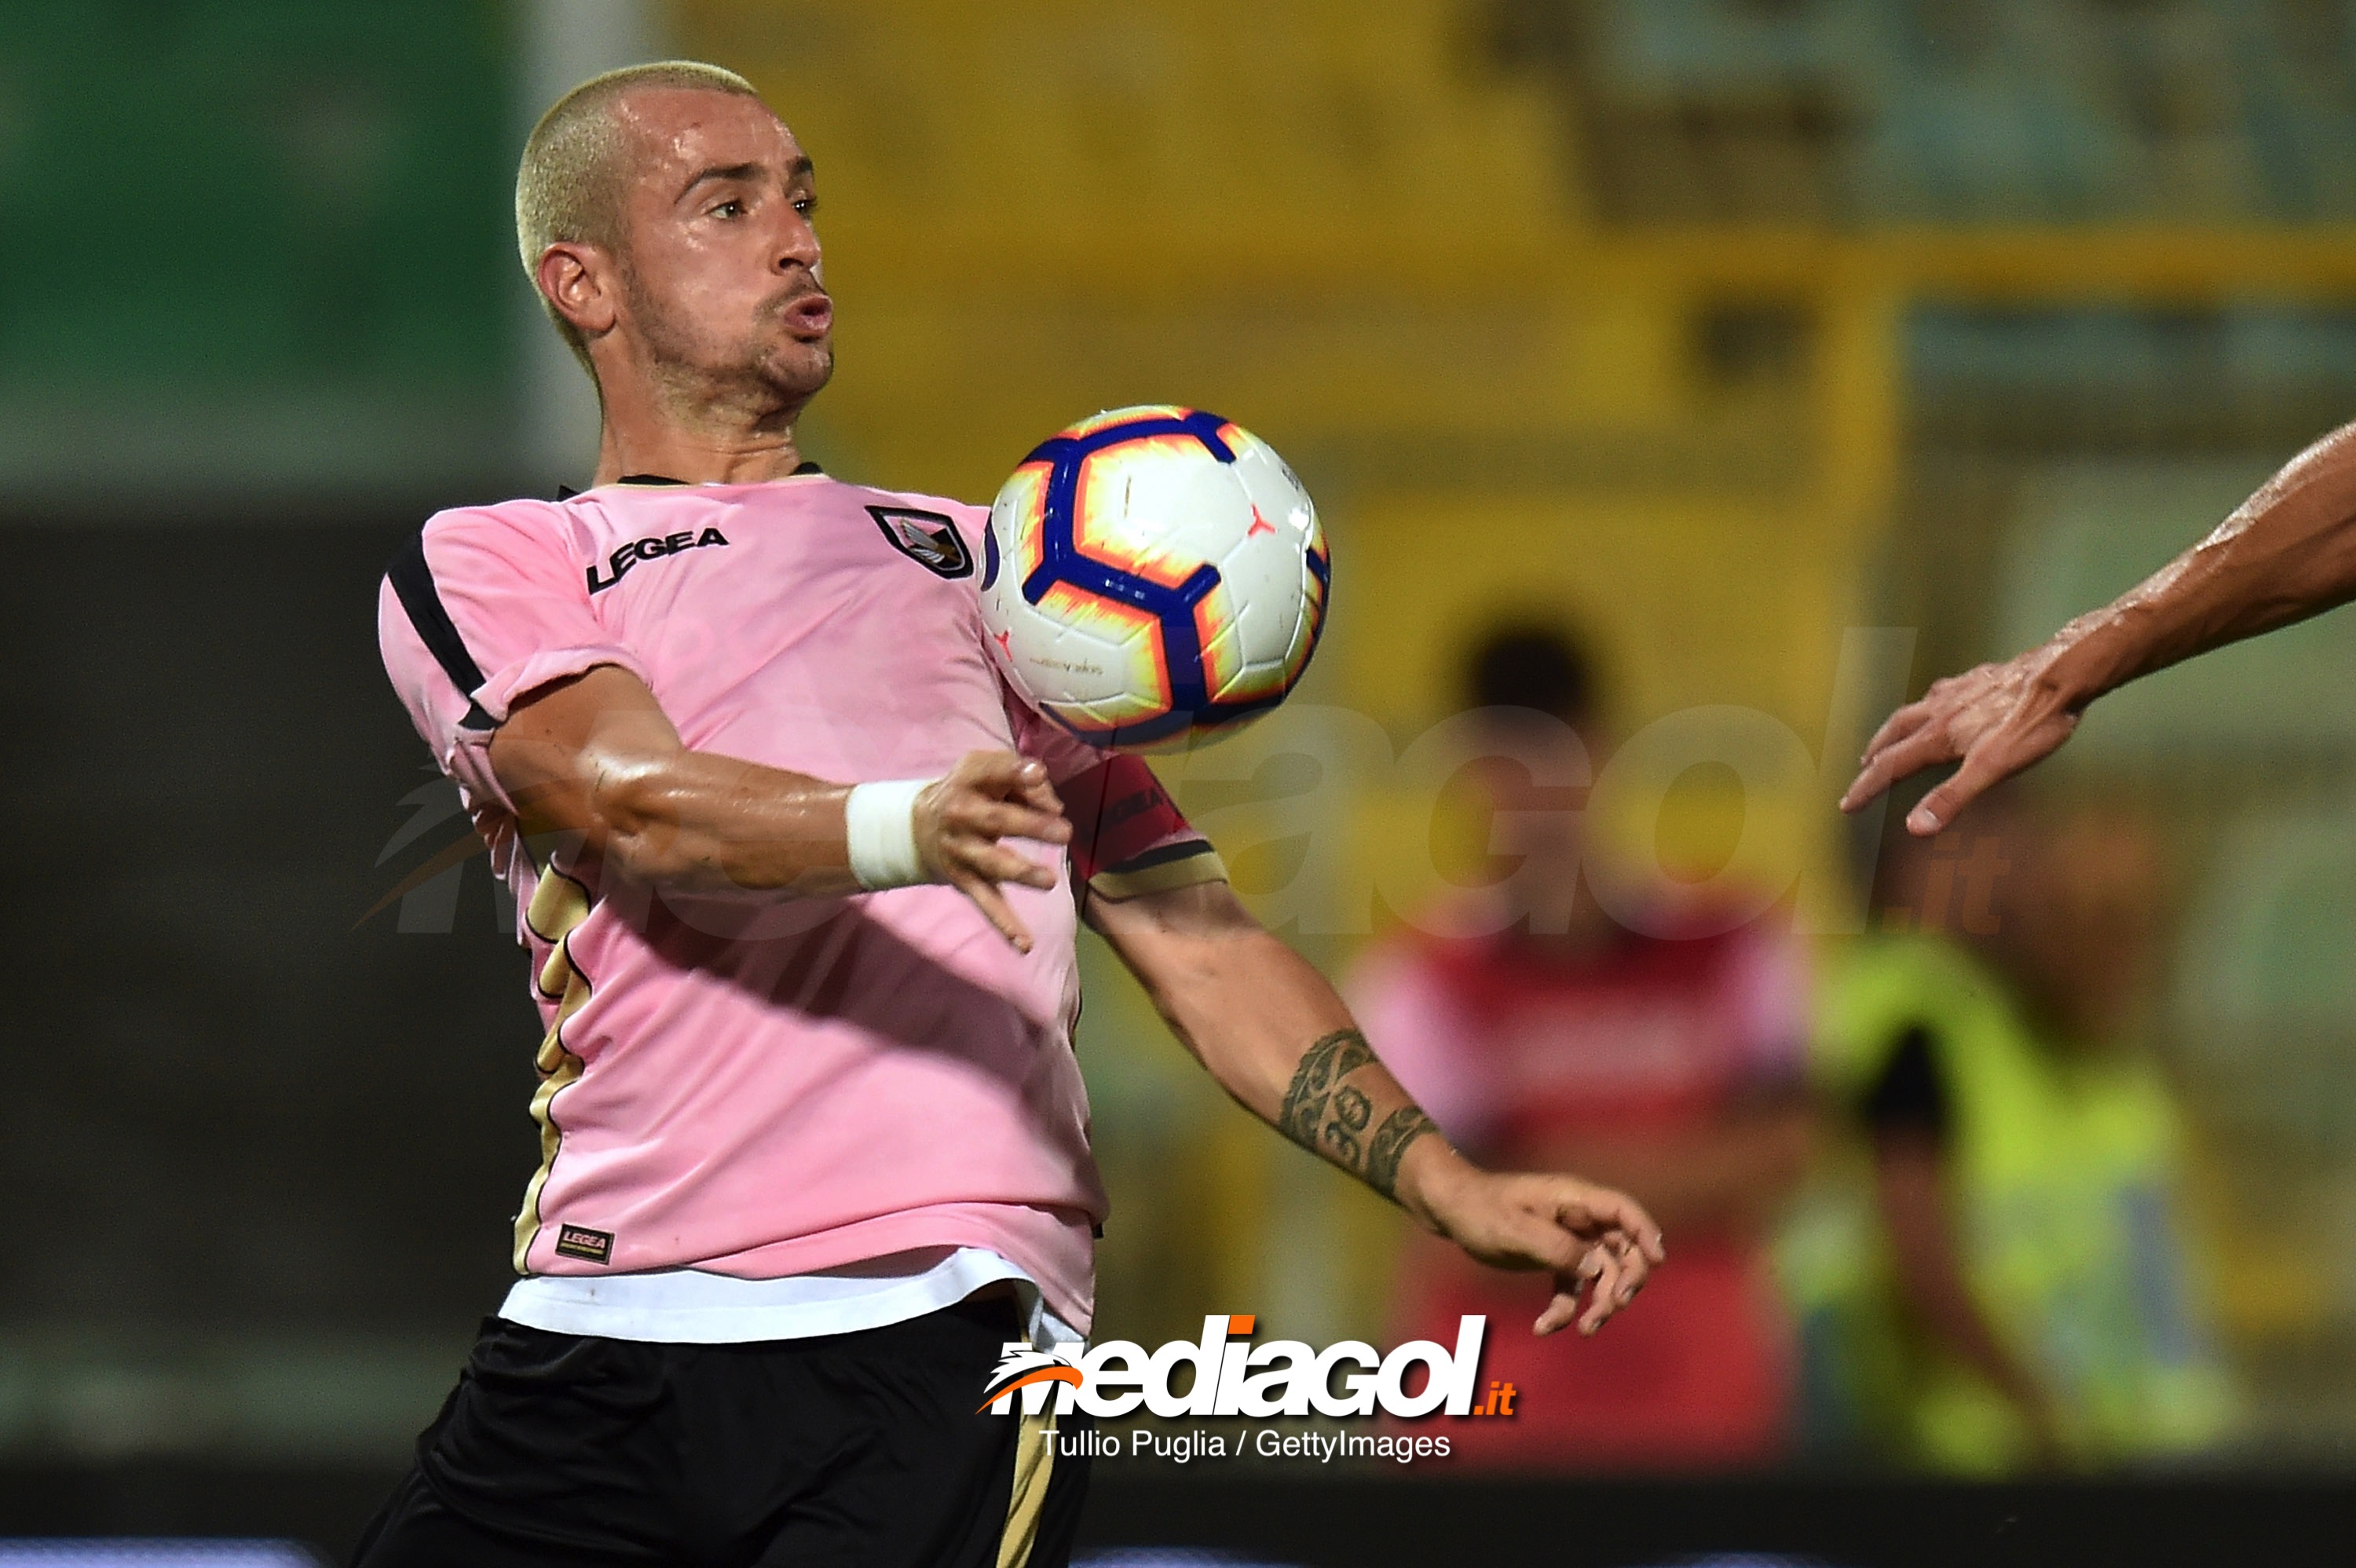 PALERMO, ITALY - AUGUST 05:  Ilija Nestorovski of Palermo controls the ball during the TIM Cup match between US Citta' di Palermo and Vicenza Calcio at Stadio Renzo Barbera on August 5, 2018 in Palermo, Italy.  (Photo by Tullio M. Puglia/Getty Images)